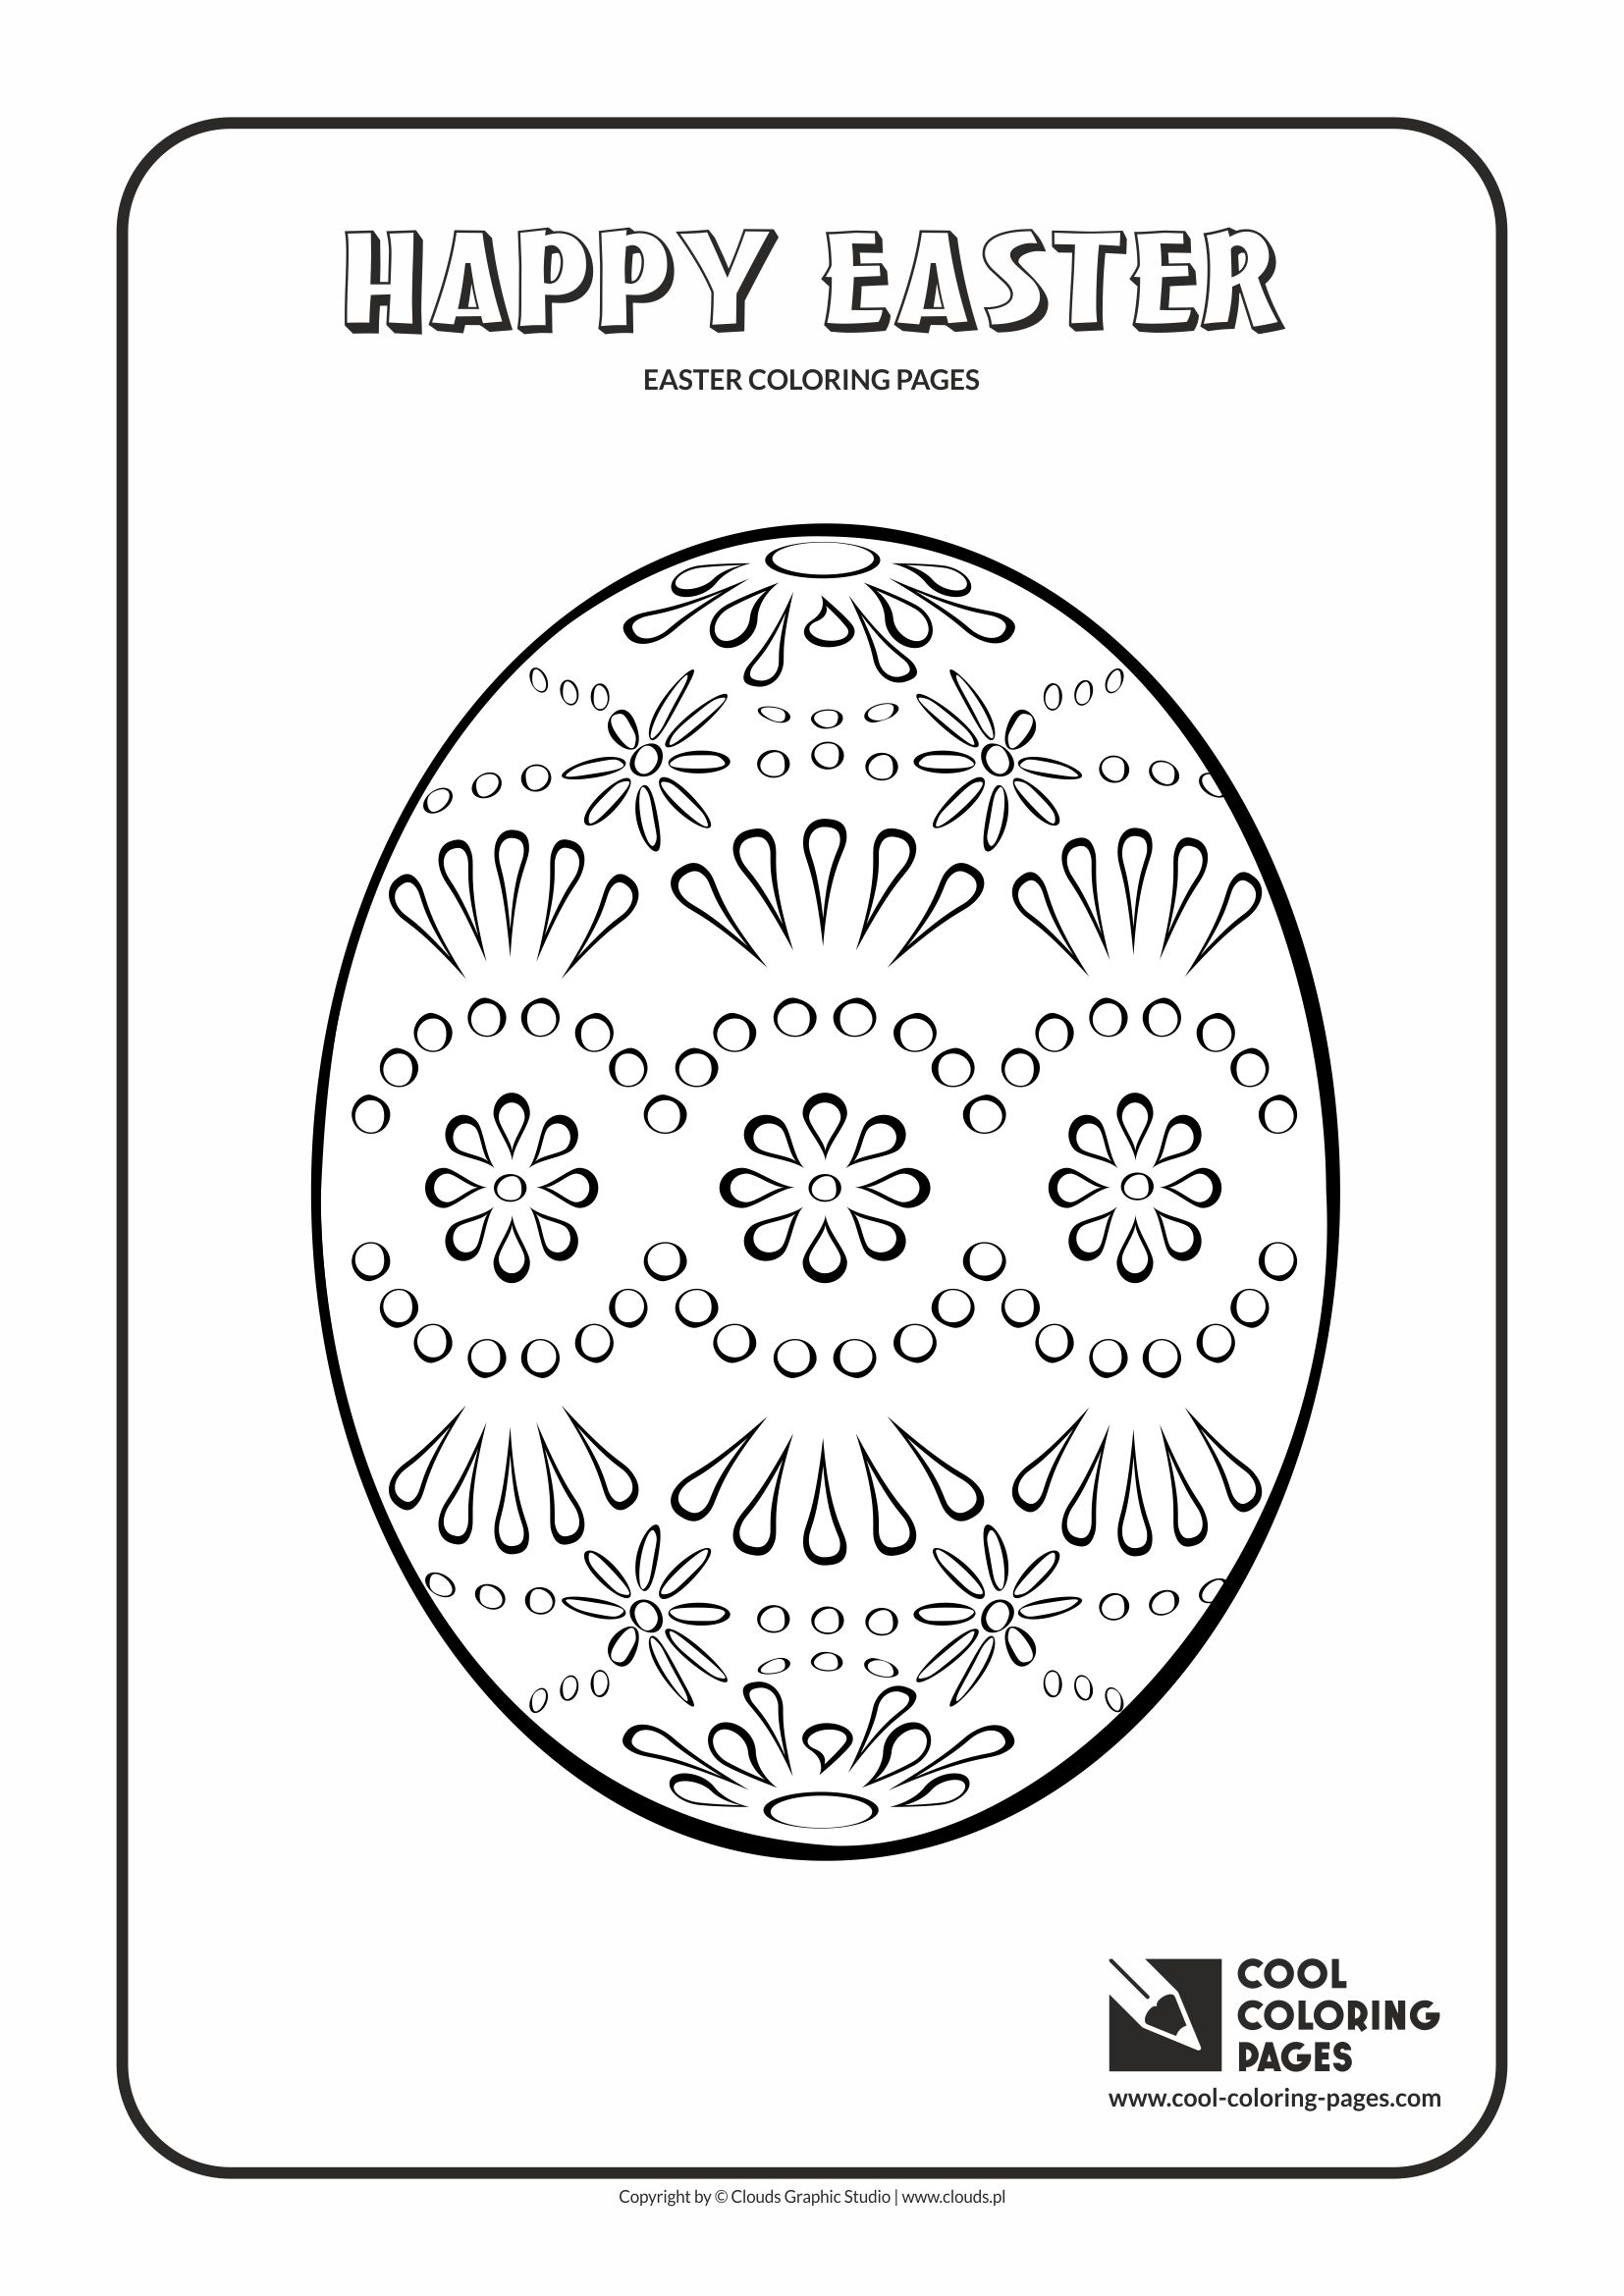 Cool Coloring Pages - Holidays / Easter egg no 5 / Coloring page with Easter egg no 5